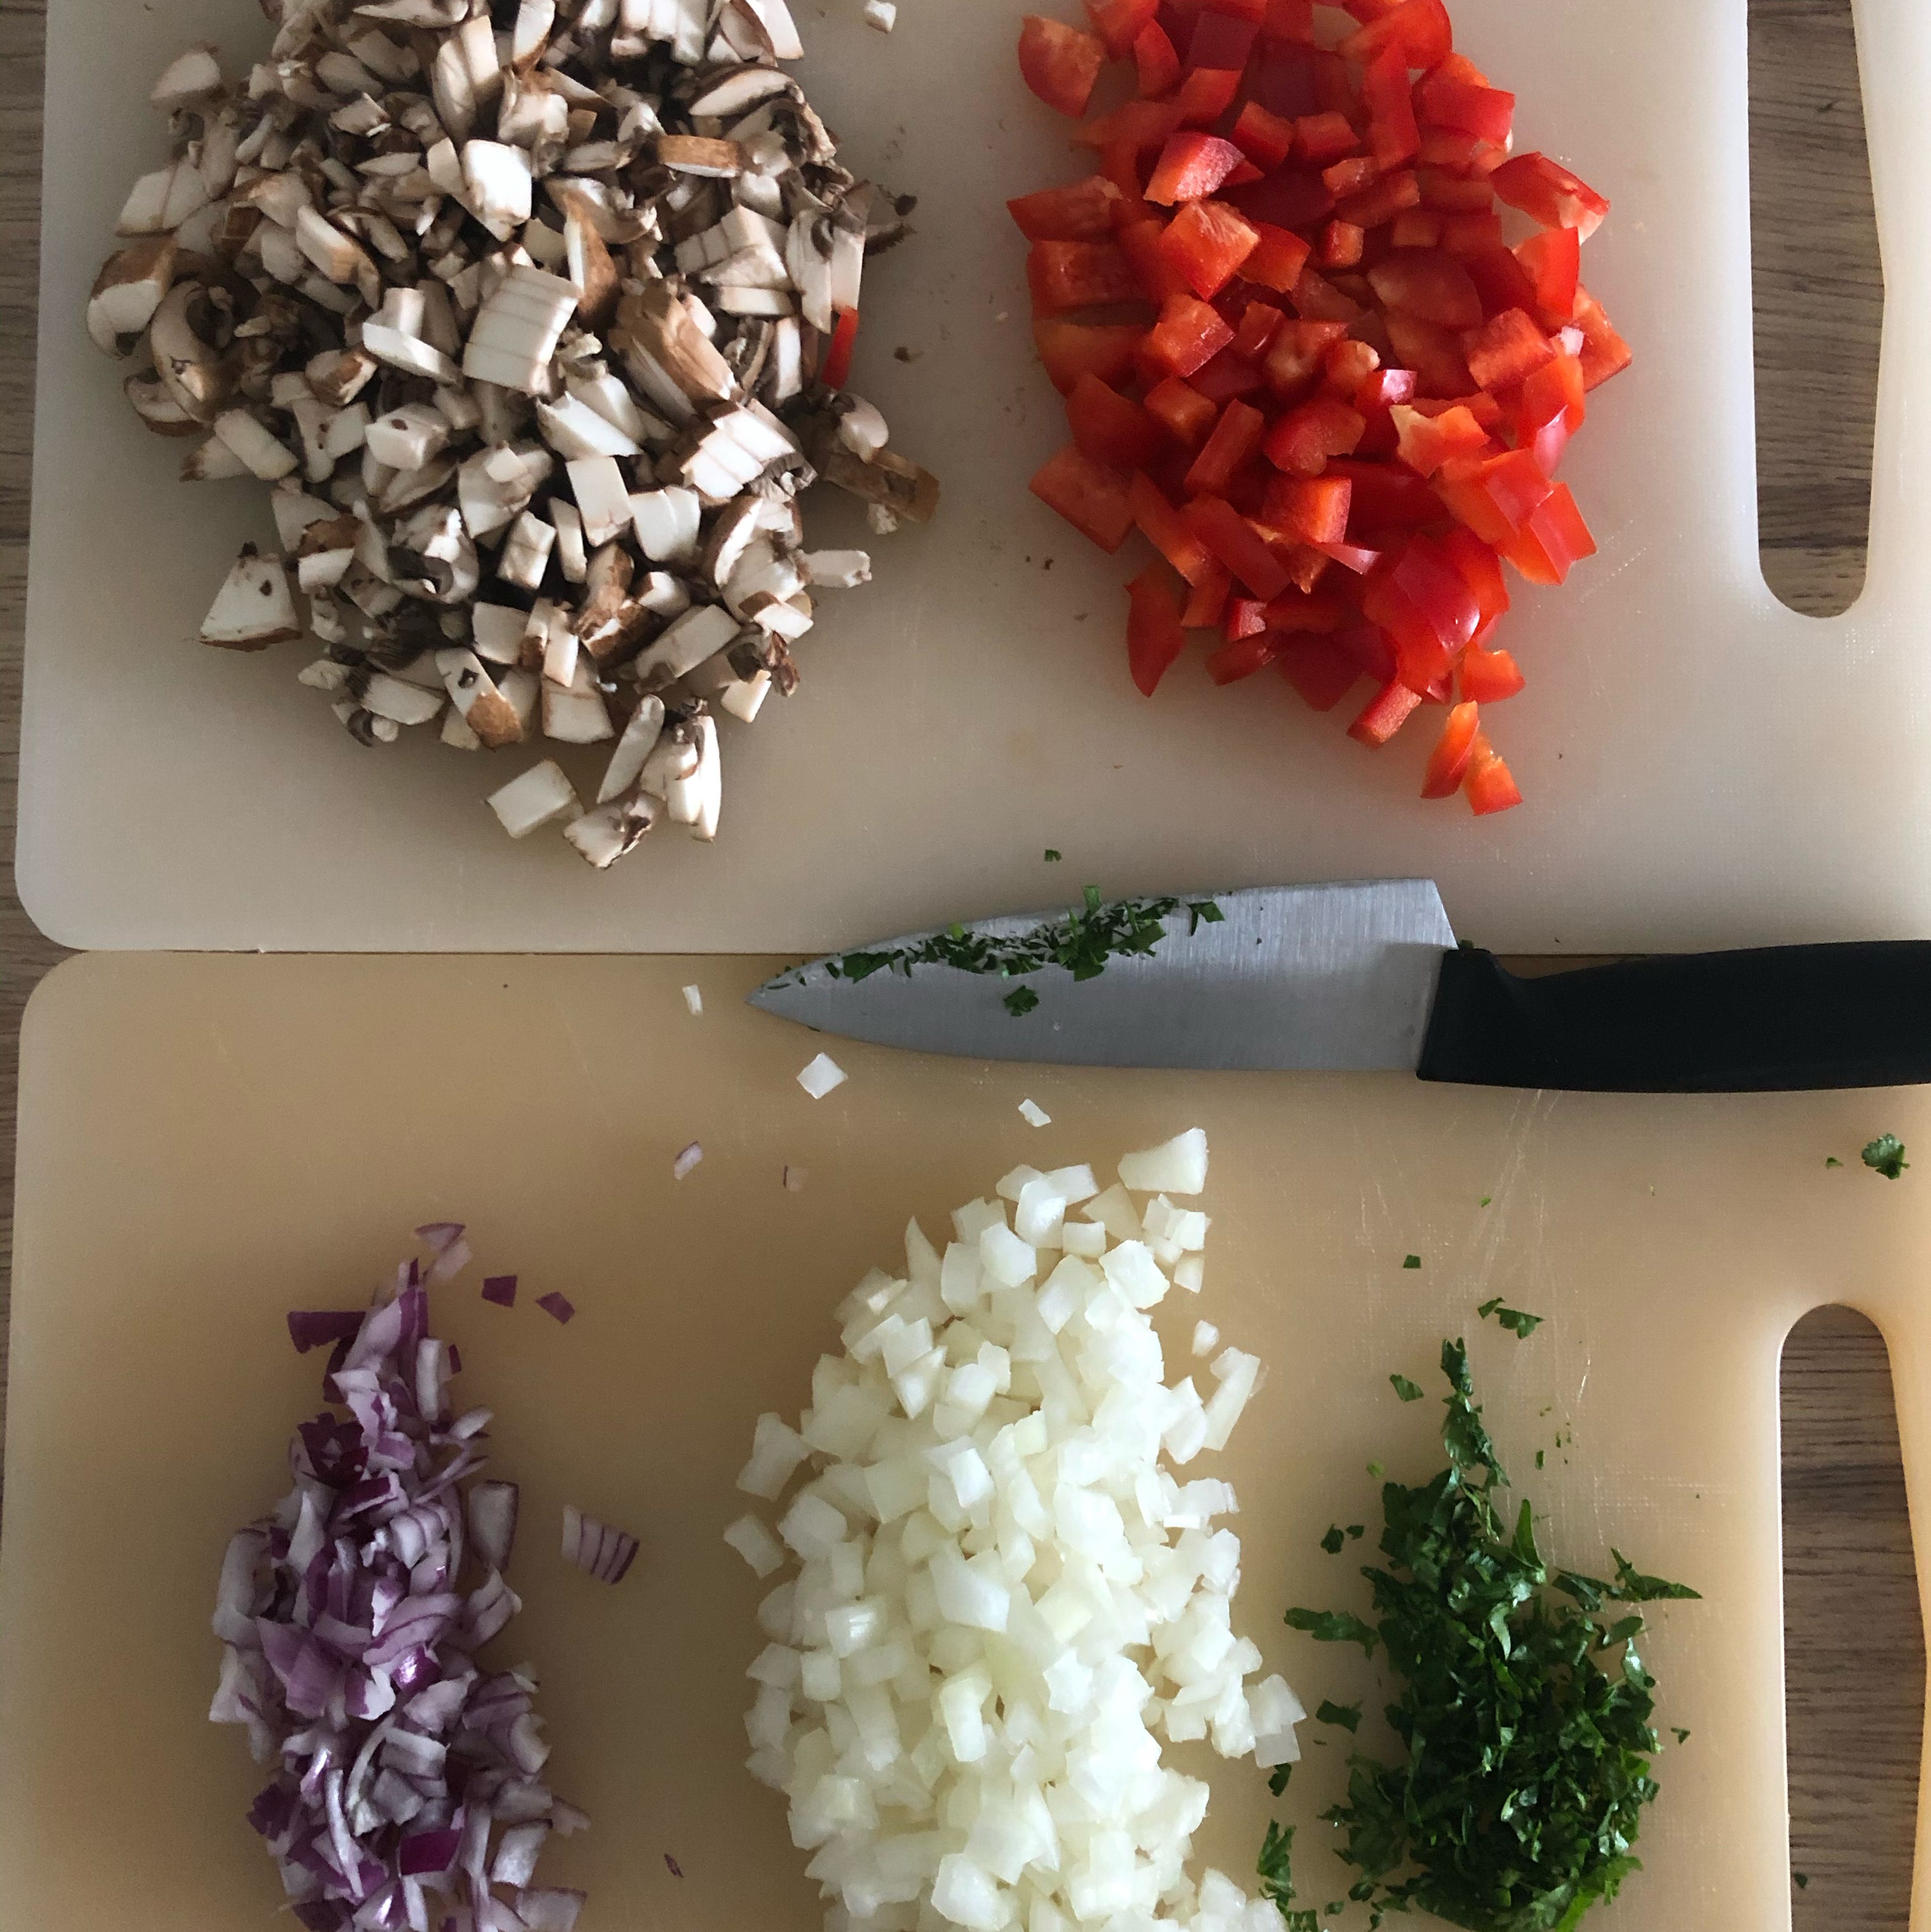 Cut the ingredients in small pieces